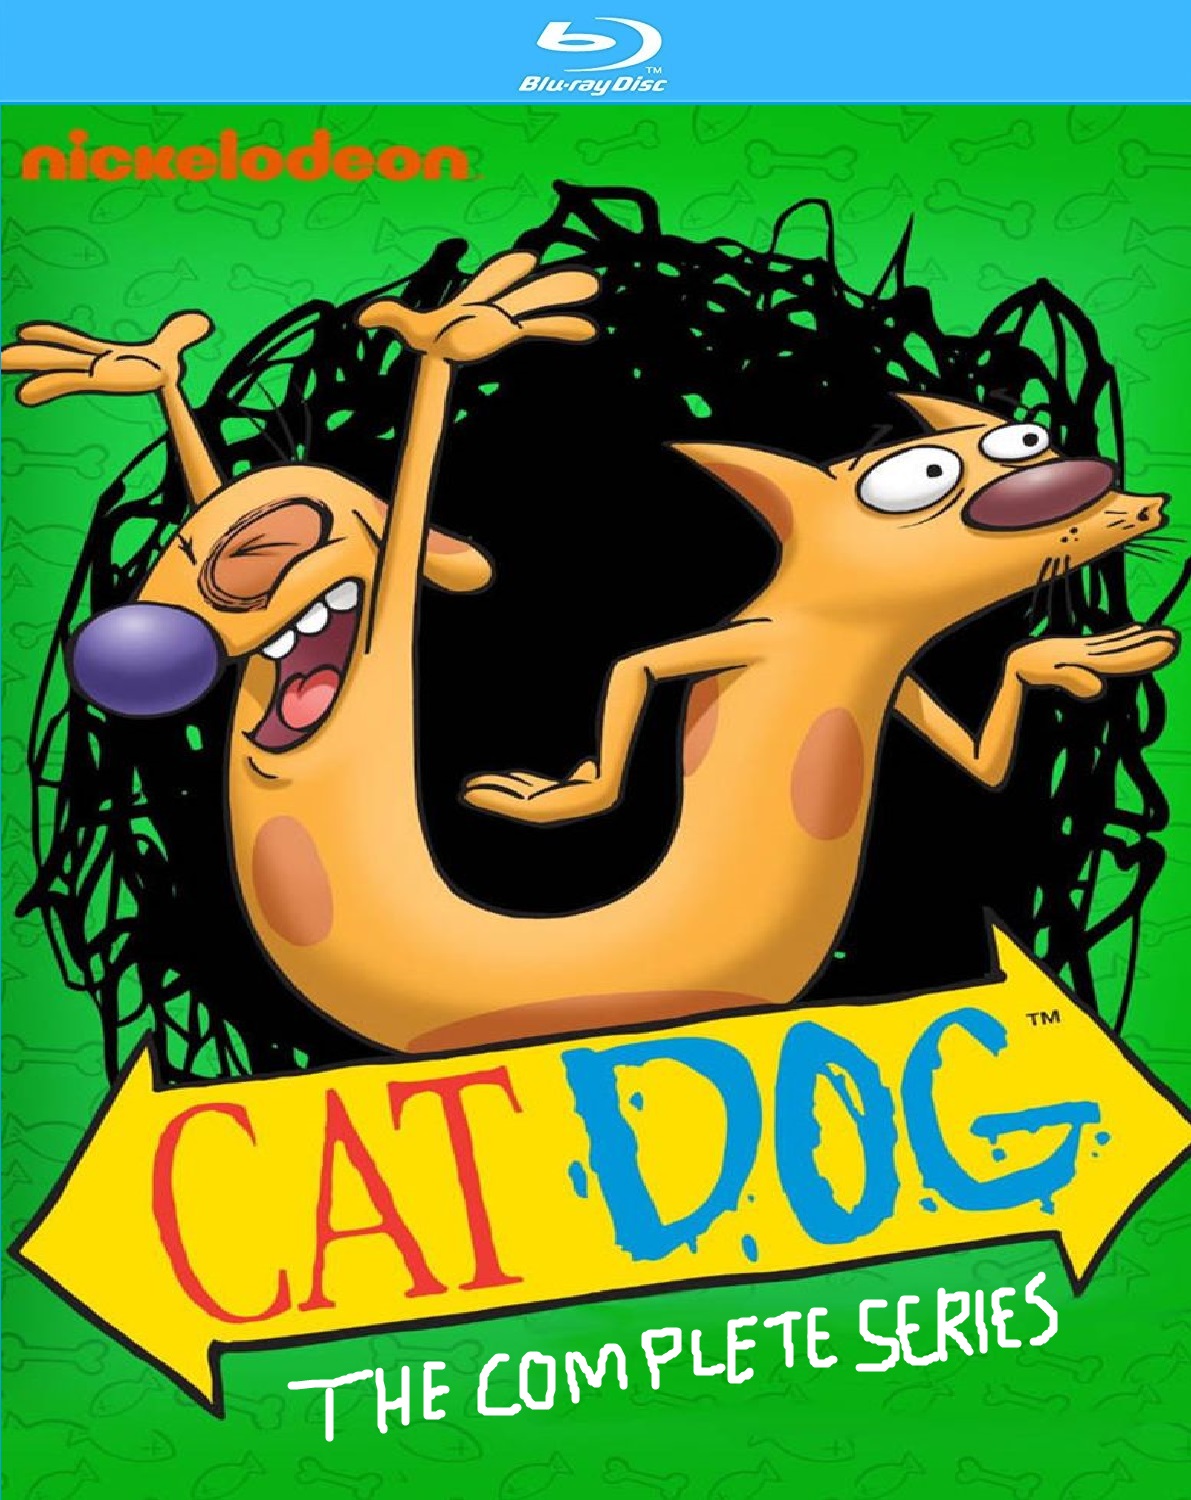 CatDog: The Complete Series – Shout! Factory